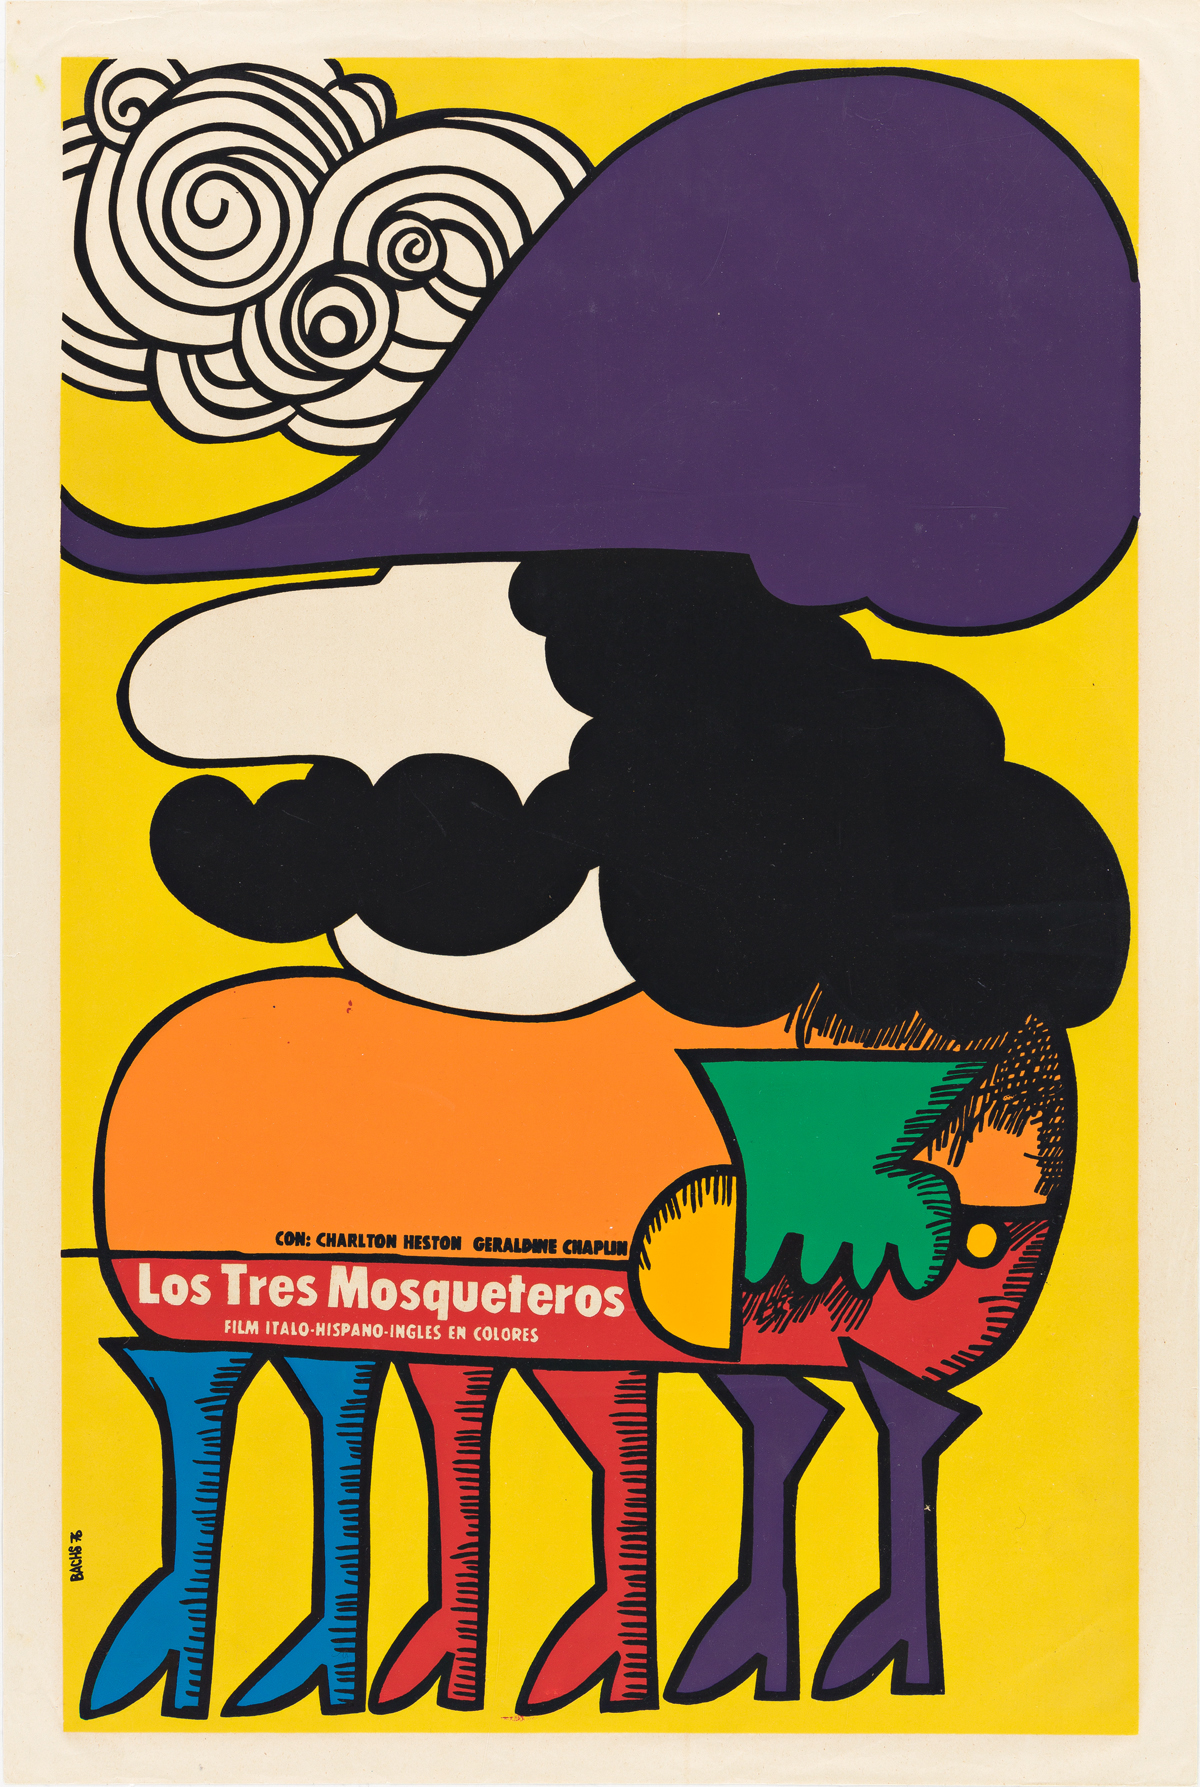 VARIOUS ARTISTS.  [CUBAN FILM & POLITICS.] Group of 10 posters. 1970s-80s. Each 30x20 inches, 76¼x50¾ cm.